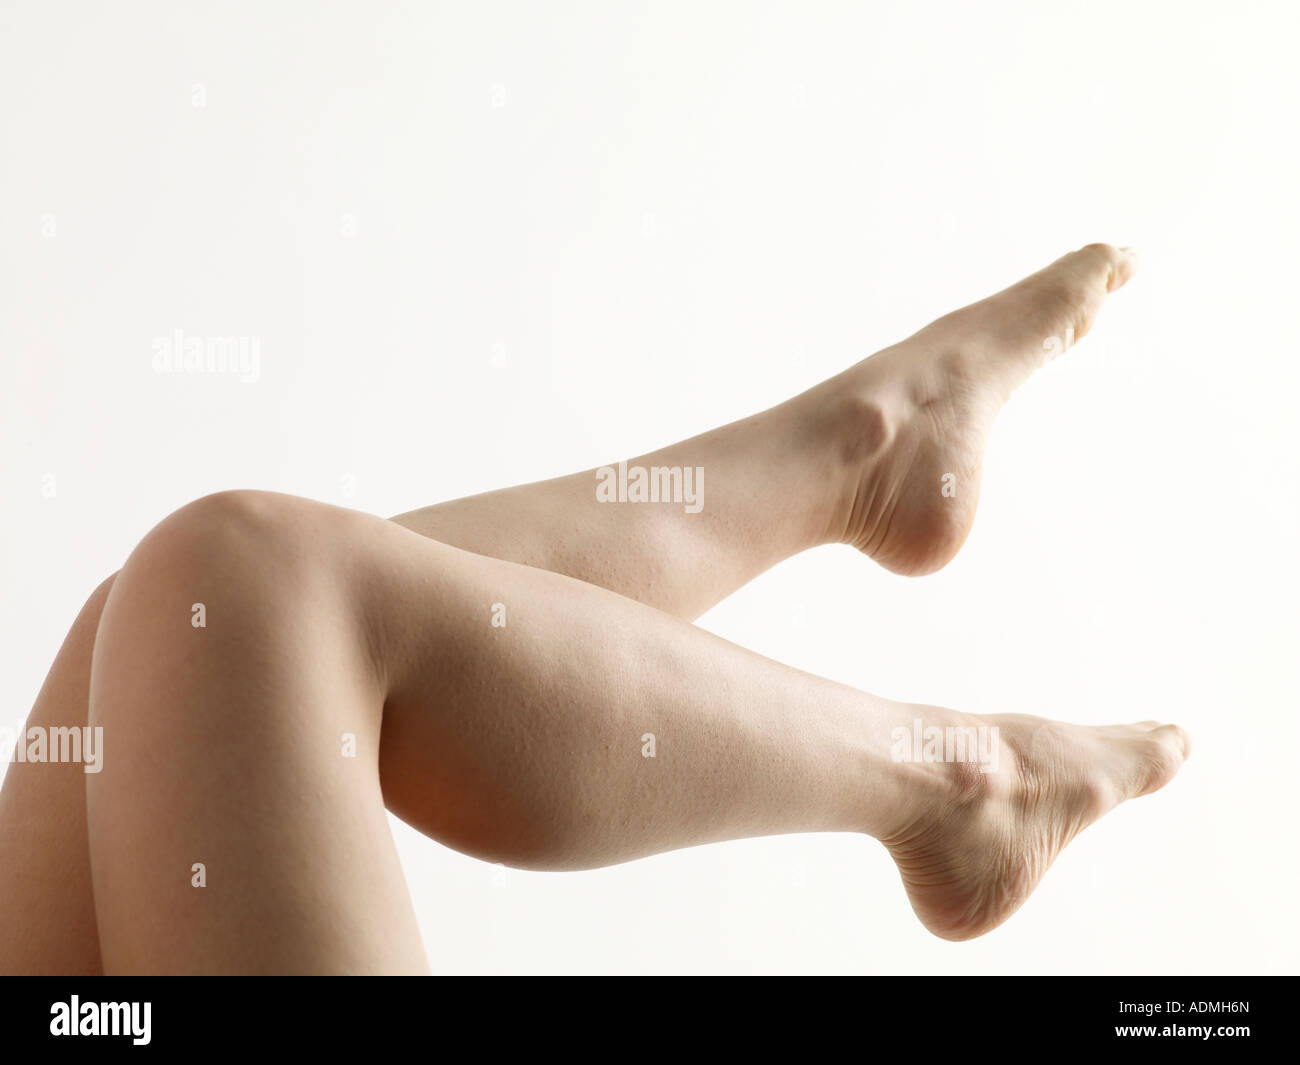 A pair of woman s legs up in the air Stock Photo